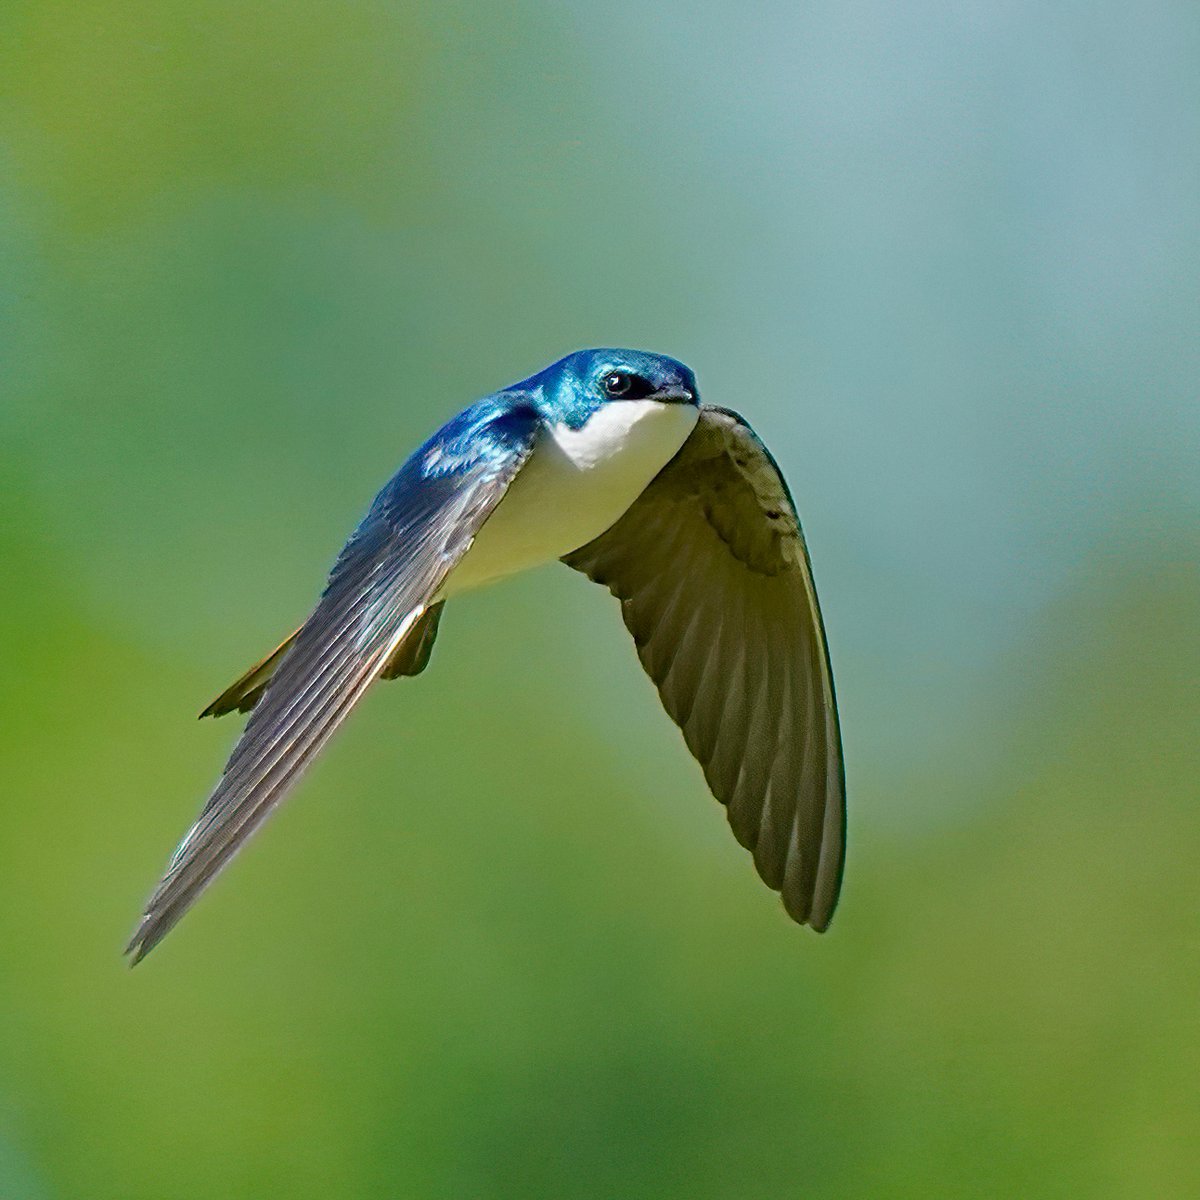 Tree Swallows are one of the first signs of spring in Virginia. Like all swallow species, they capture insects in flight with acrobatic twists and turns. Learn more at hollywoodcemetery.org/visit/natural-… Photo: Bill Draper Photography